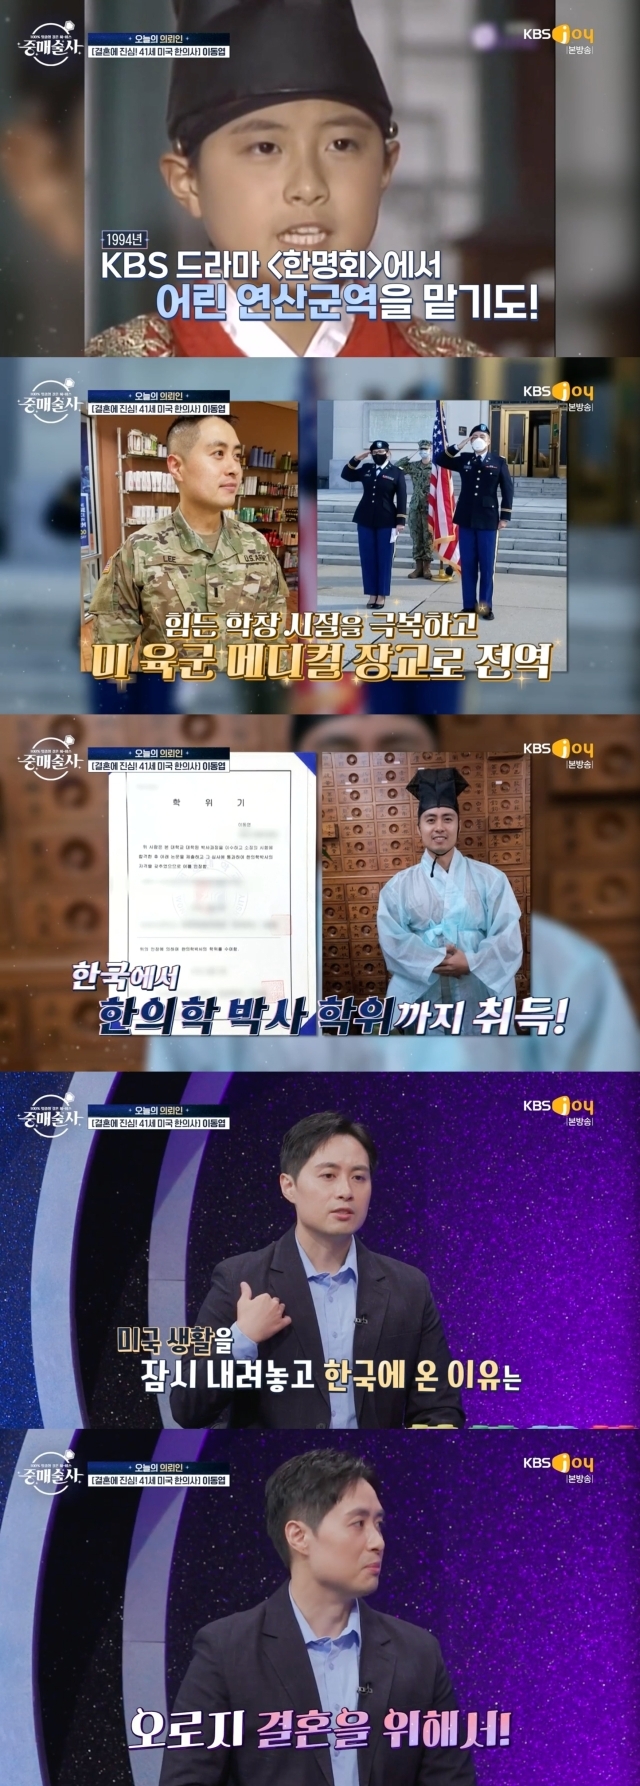 Lee Dong-yeob, a 41-year-old United States of America herbalist from a child actor, said it has been a year and a half since he came to Korea to find a companion partner.The cable channel broadcast on the 19th KBS Joy entertainment program  ⁇  matchmaker  ⁇  The Client, which had a big topic with a huge spec at the time of the last broadcast, appeared again.Lee Dong-yeob, a 41-year-old United States of America oriental medical doctor, flew 7,000 miles from New York to Korea to find true love and introduced himself.Lee Dong-yeob also surprised me when I was a child actor in Korea when I was a child.Lee Dong-yeob said that he made his first drama debut in 1994 as a child of actor Choi Soo-jong in the drama  ⁇  ambition  ⁇   ⁇   ⁇ .In the same year, he also surprised everyone by saying that he had played the role of a young arithmetic group in the drama  ⁇   ⁇   ⁇   ⁇   ⁇ .Lee Dong-yeob, a US Army medical officer, worked as an occupational therapist after the war and became interested in oriental medicine and earned a doctorate in oriental medicine from Korea.About The Client Lee Dong-yeob, who is currently living in Korea with Parent, MC Shin Dong-yup said that he came to Korea from the United States of America to find a companion partner for a lifetime and is living in Korea for about a year and a half. I asked him, What do you do for living expenses?Lee Dong-yeob has been living in the United States of America for a while and has been living with it. He came to Korea and bought a private apartment in Sejong City.So Im covering the rent from there. In addition, Lee Dong-yeob said that the most important thing in my life is marriage, so I came to Korea.